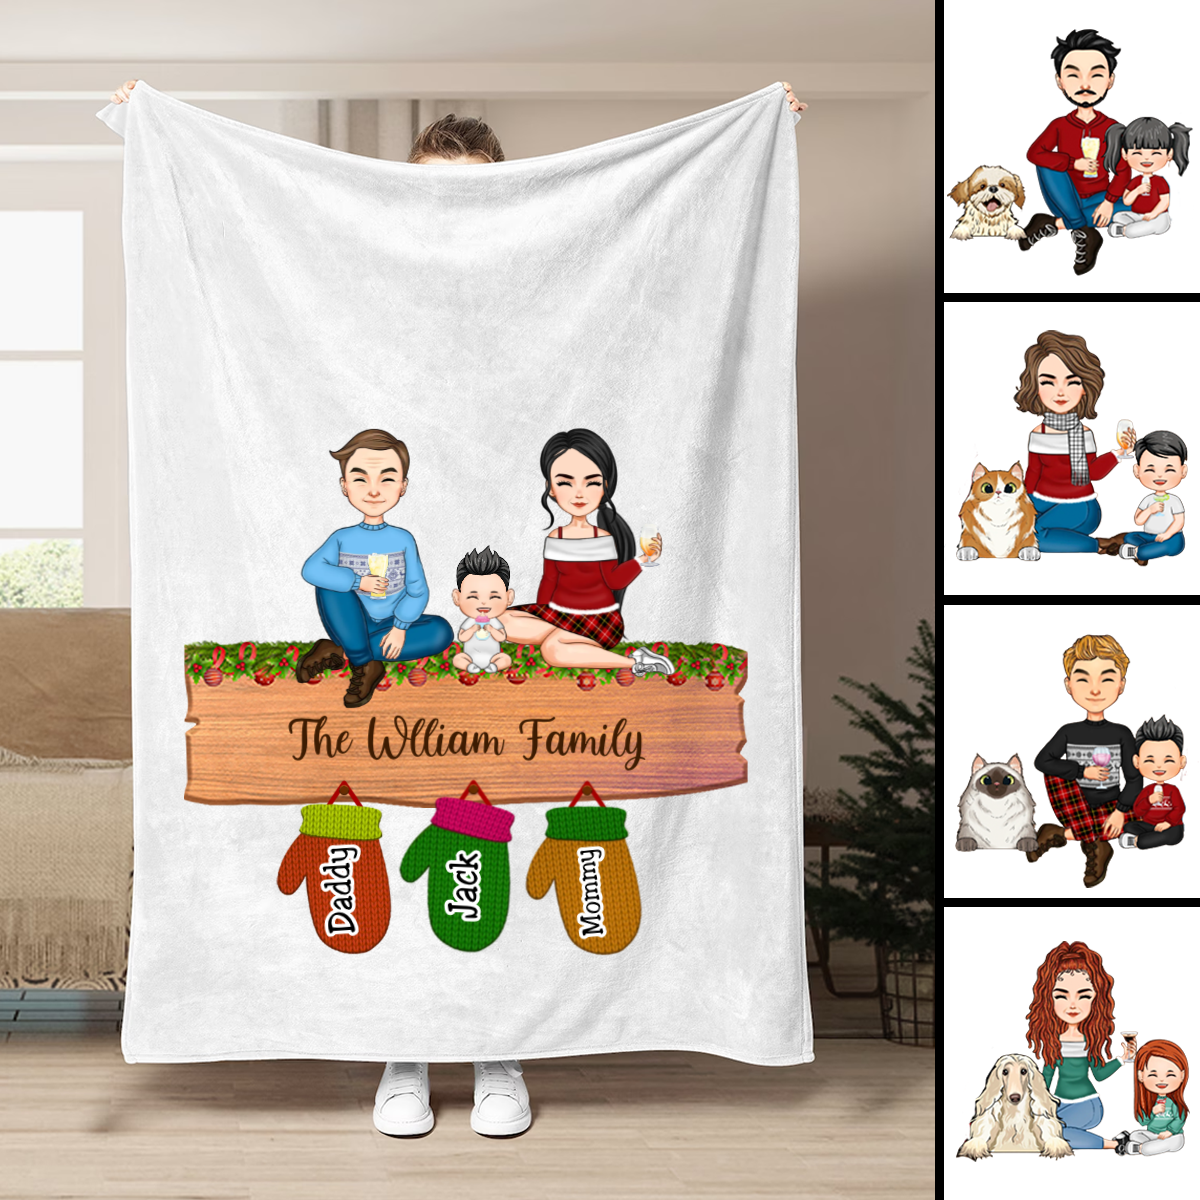 Discover Family - Family Peeking Christmas Glove - Personalized Blanket